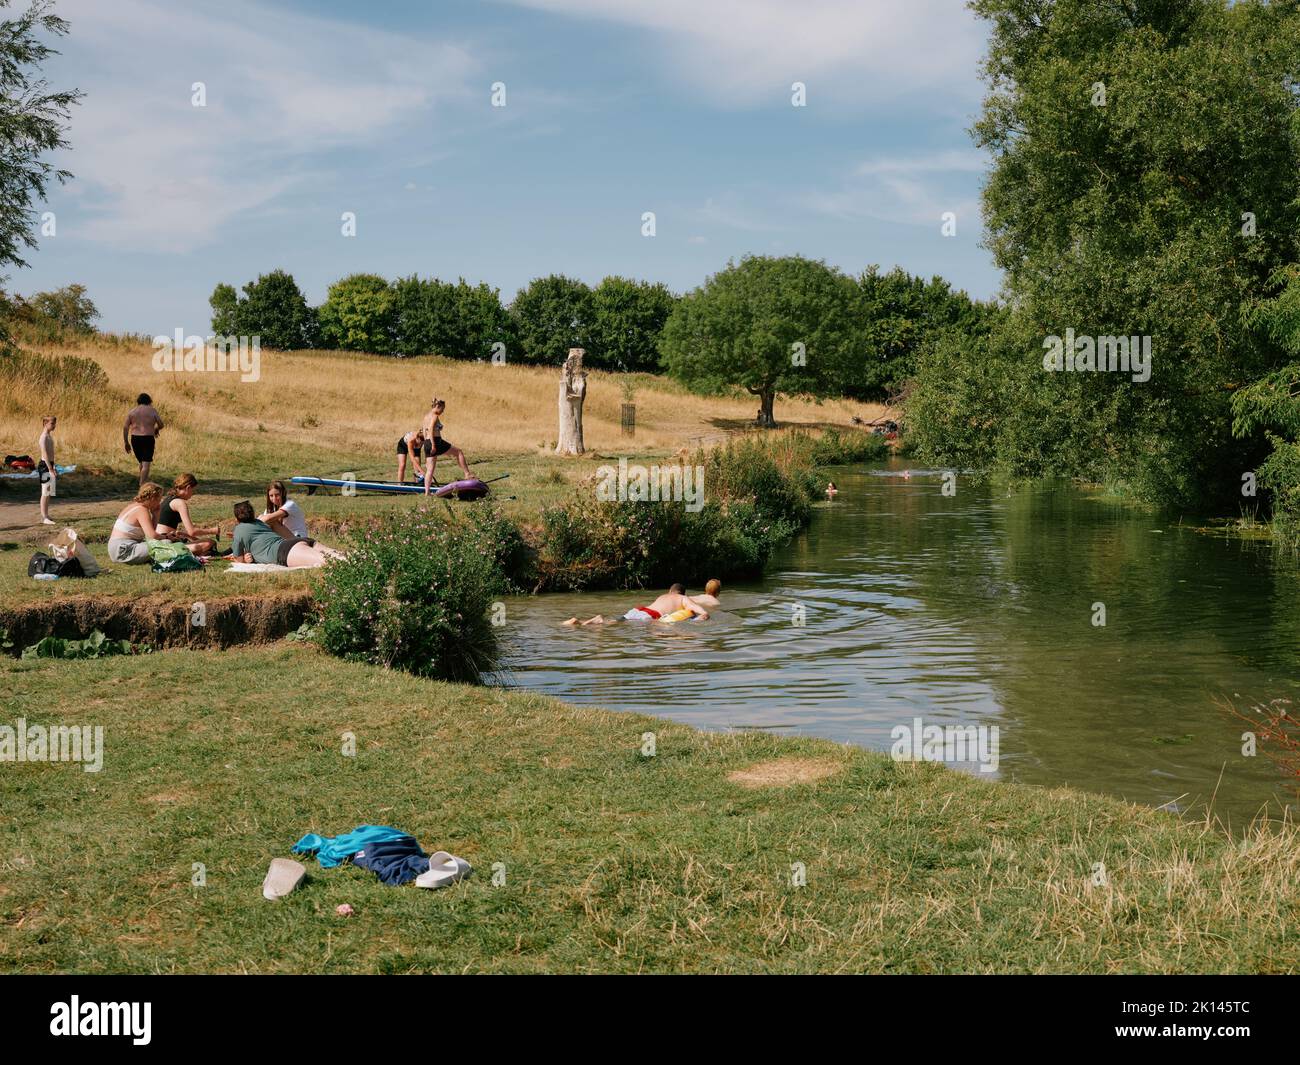 Summer swimming in Grantchester Meadows on the River Cam in Cambridge Cambridgeshire England UK - summertime countryside people swimmers Stock Photo